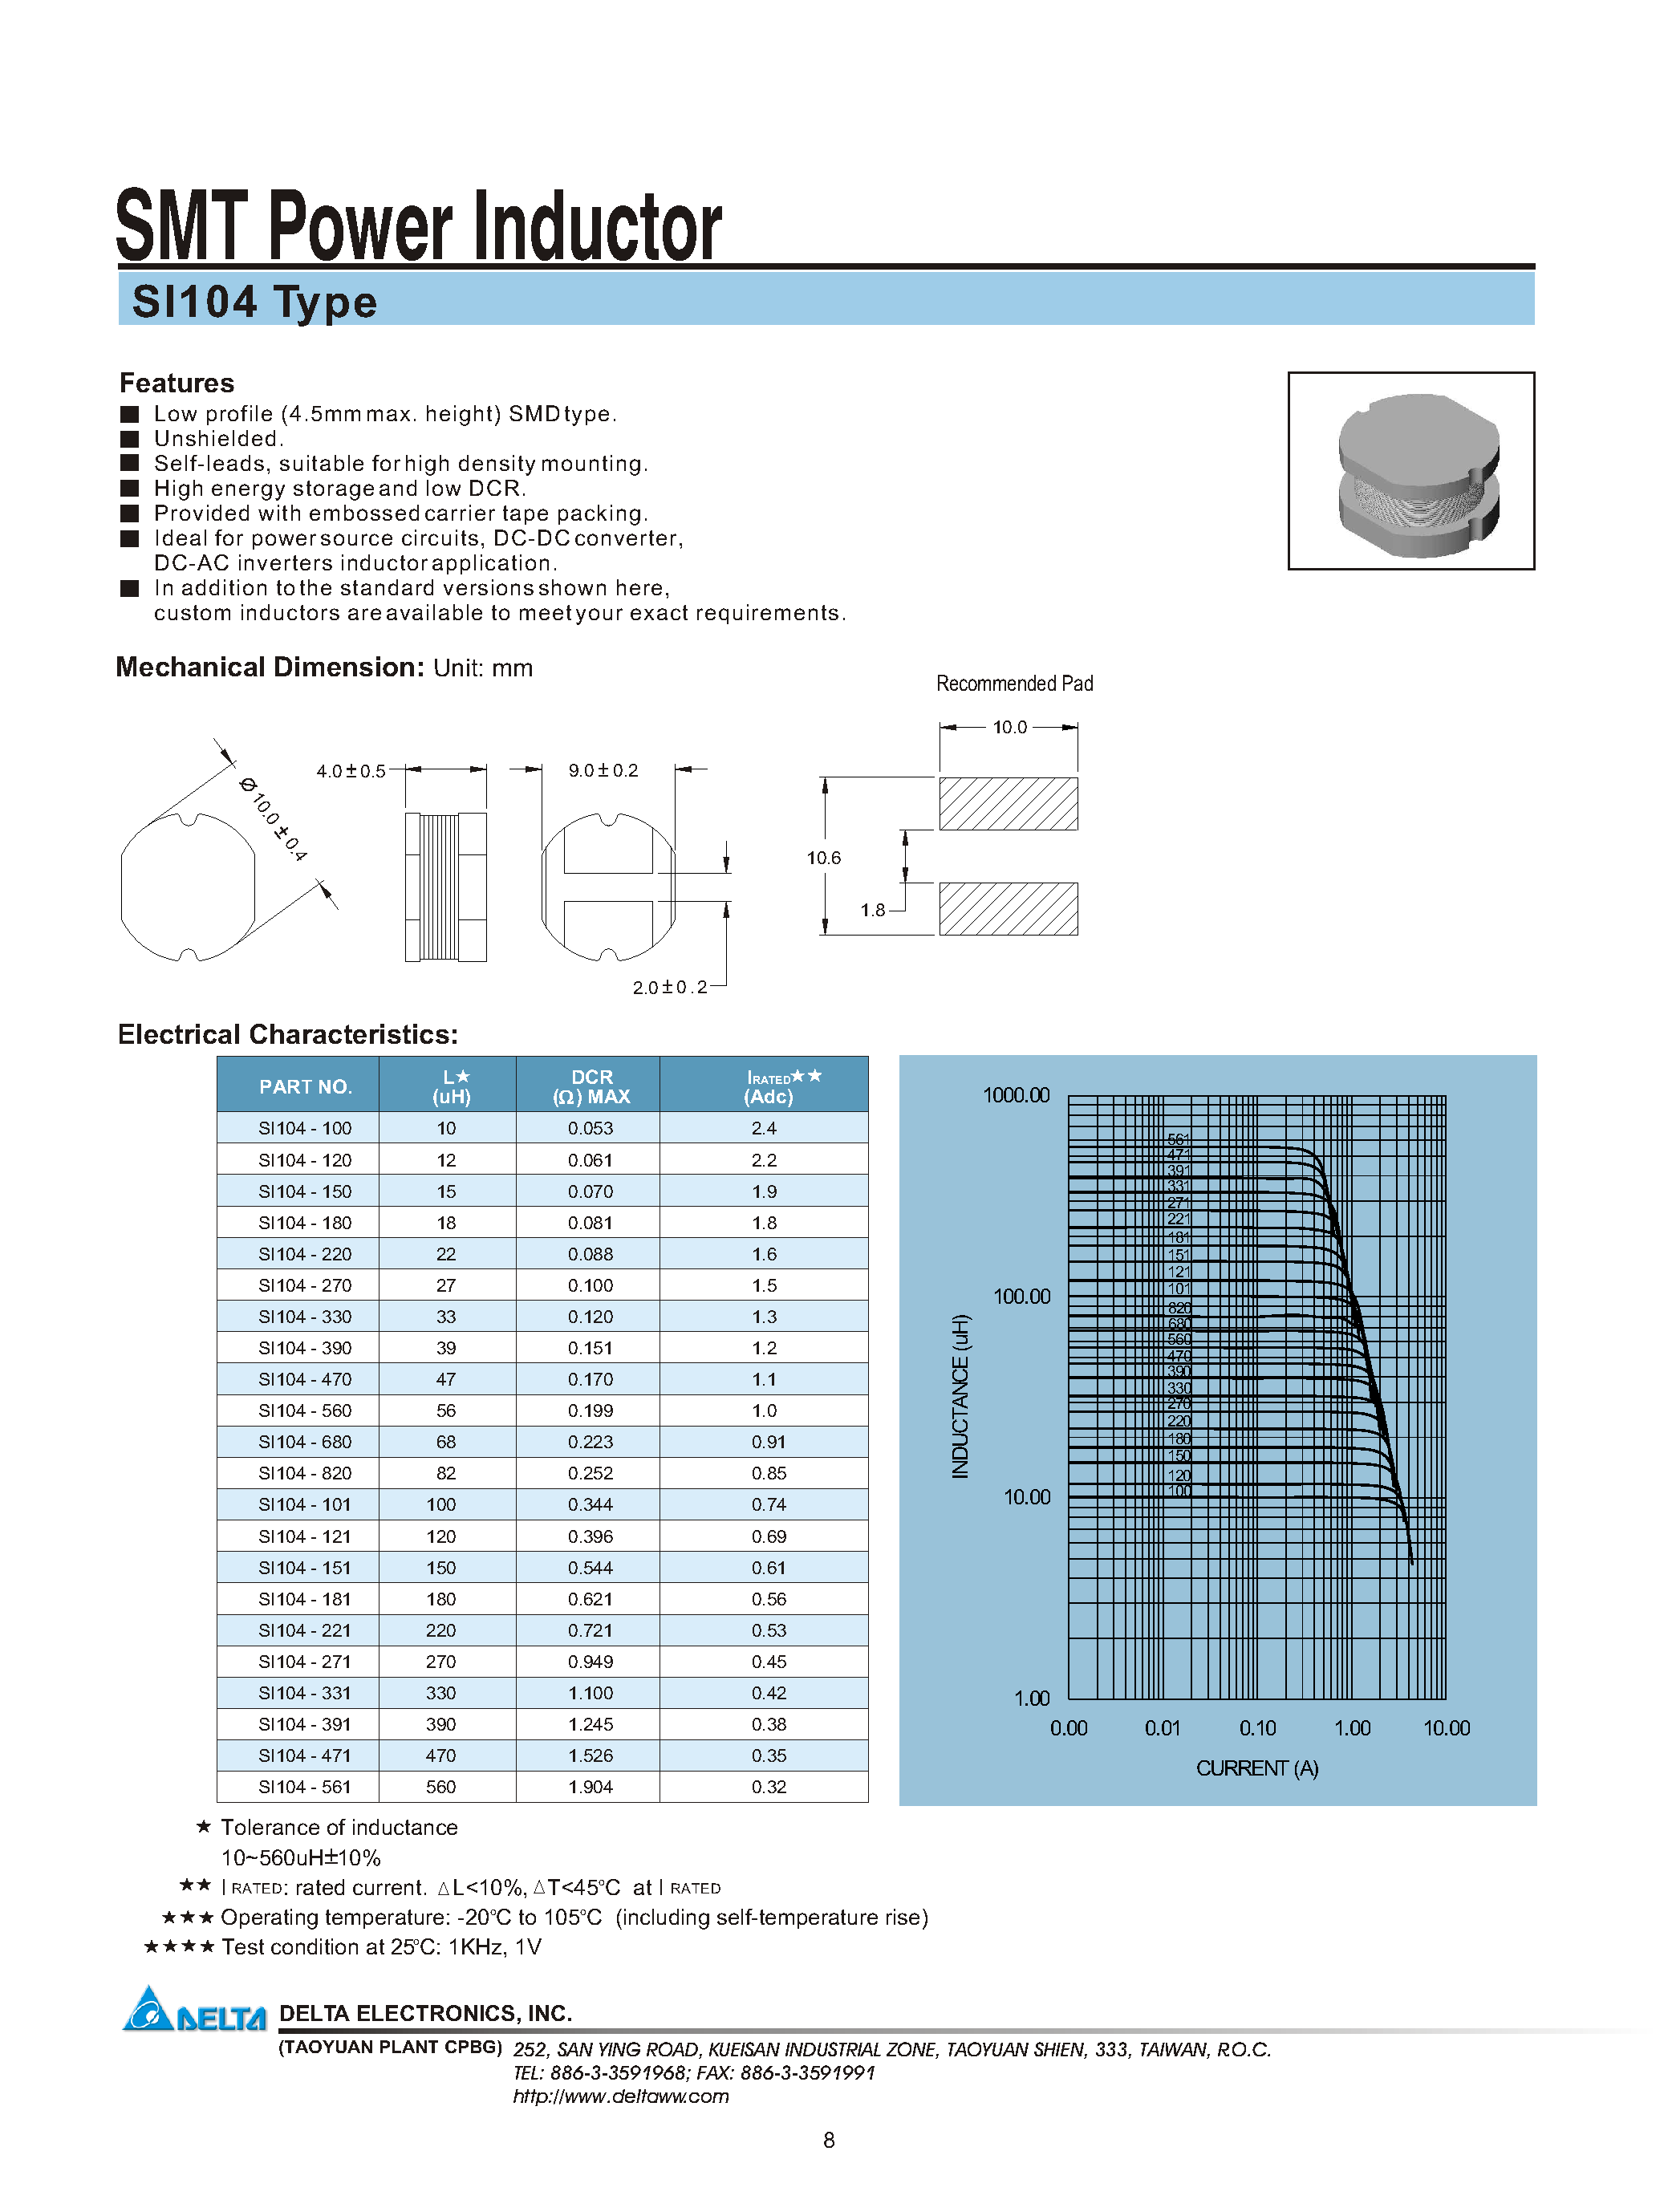 Datasheet SI104-331 - SMT Power Inductor page 1